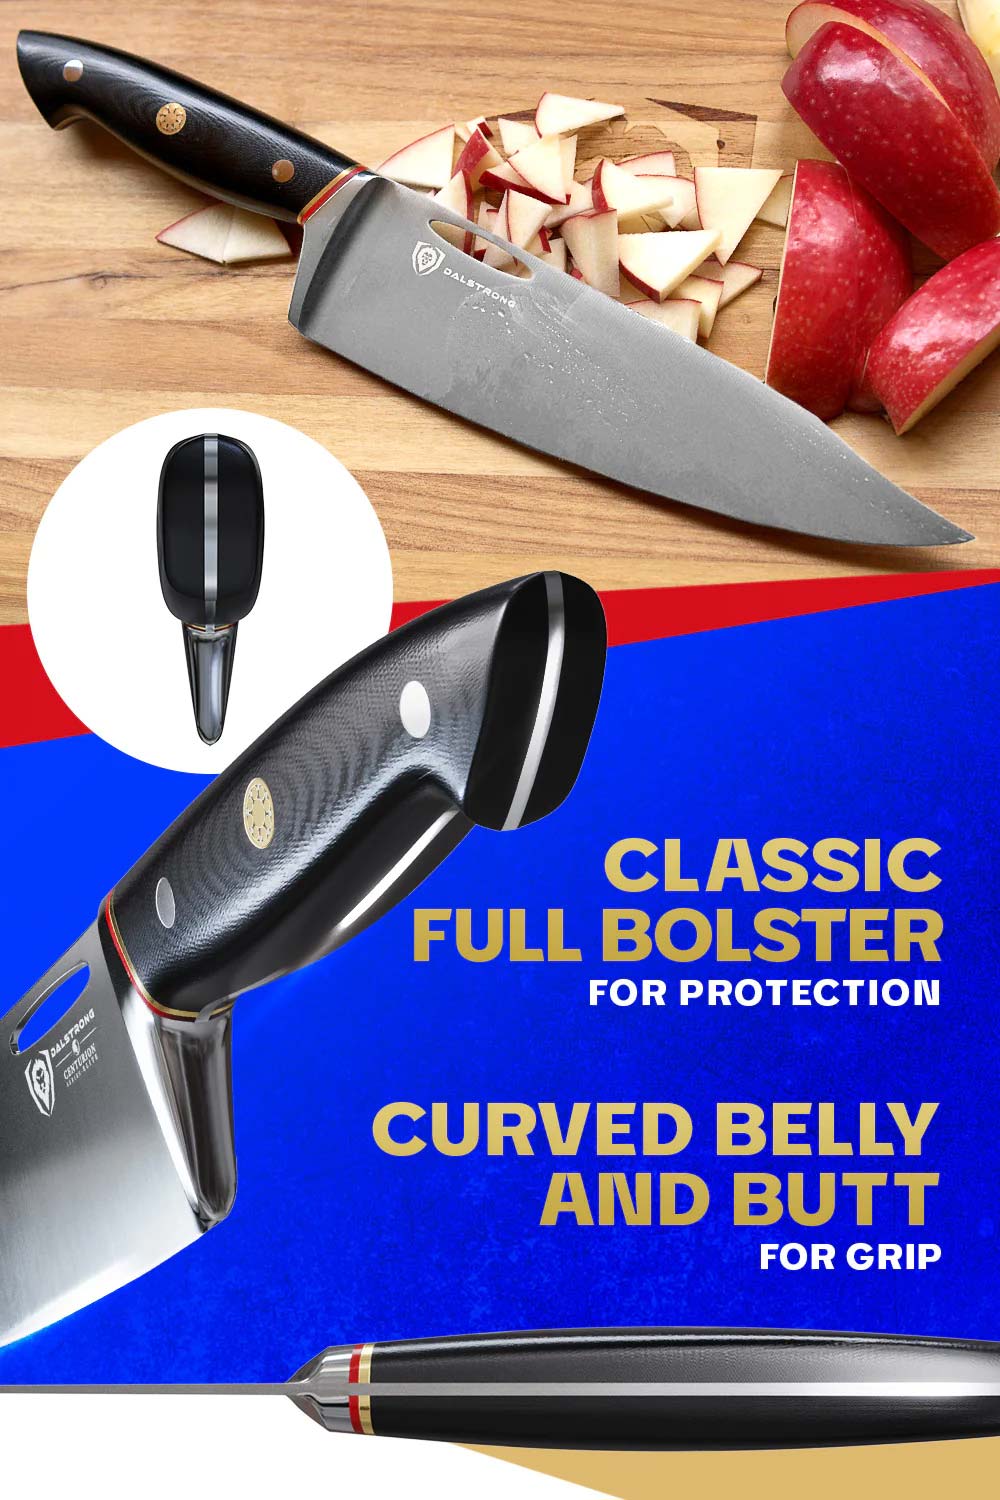 Dalstrong Butcher Knife - 10 inch - Centurion Series - Premium Swedish 14C28N High Carbon Stainless Steel - G10 Handle Meat Kitchen Knife - Razor